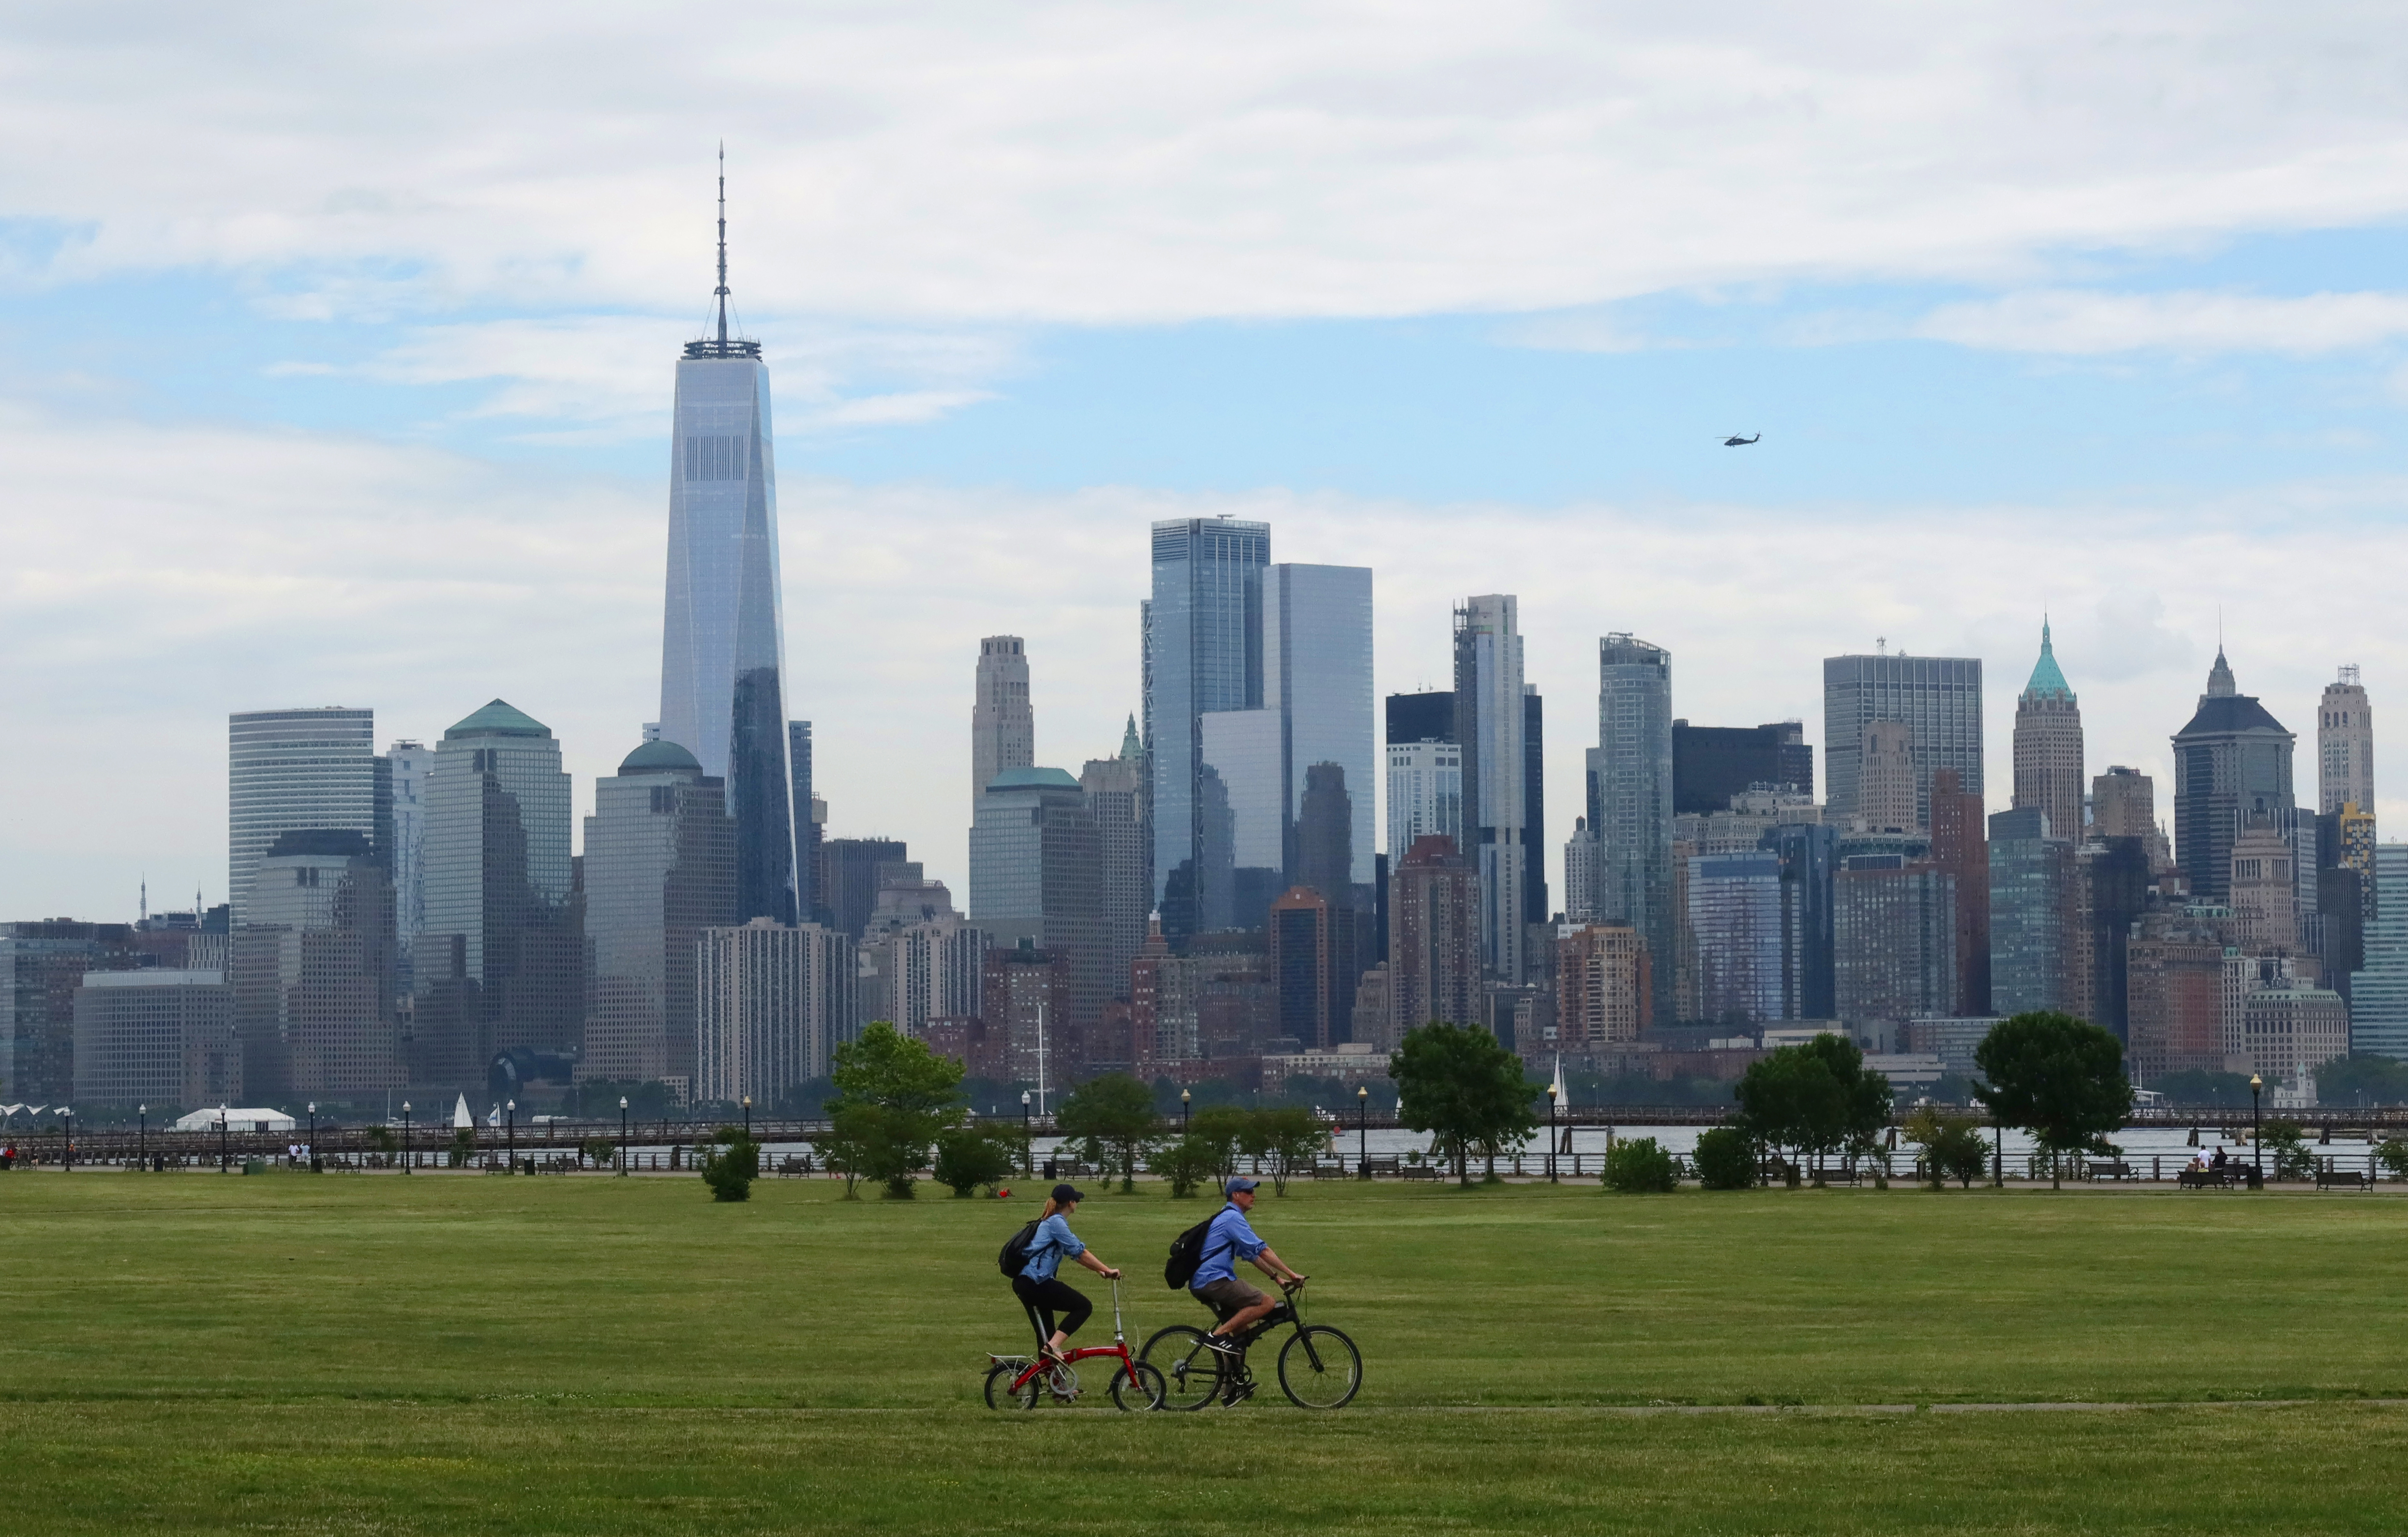 A photo of people bicycling near Manhattan